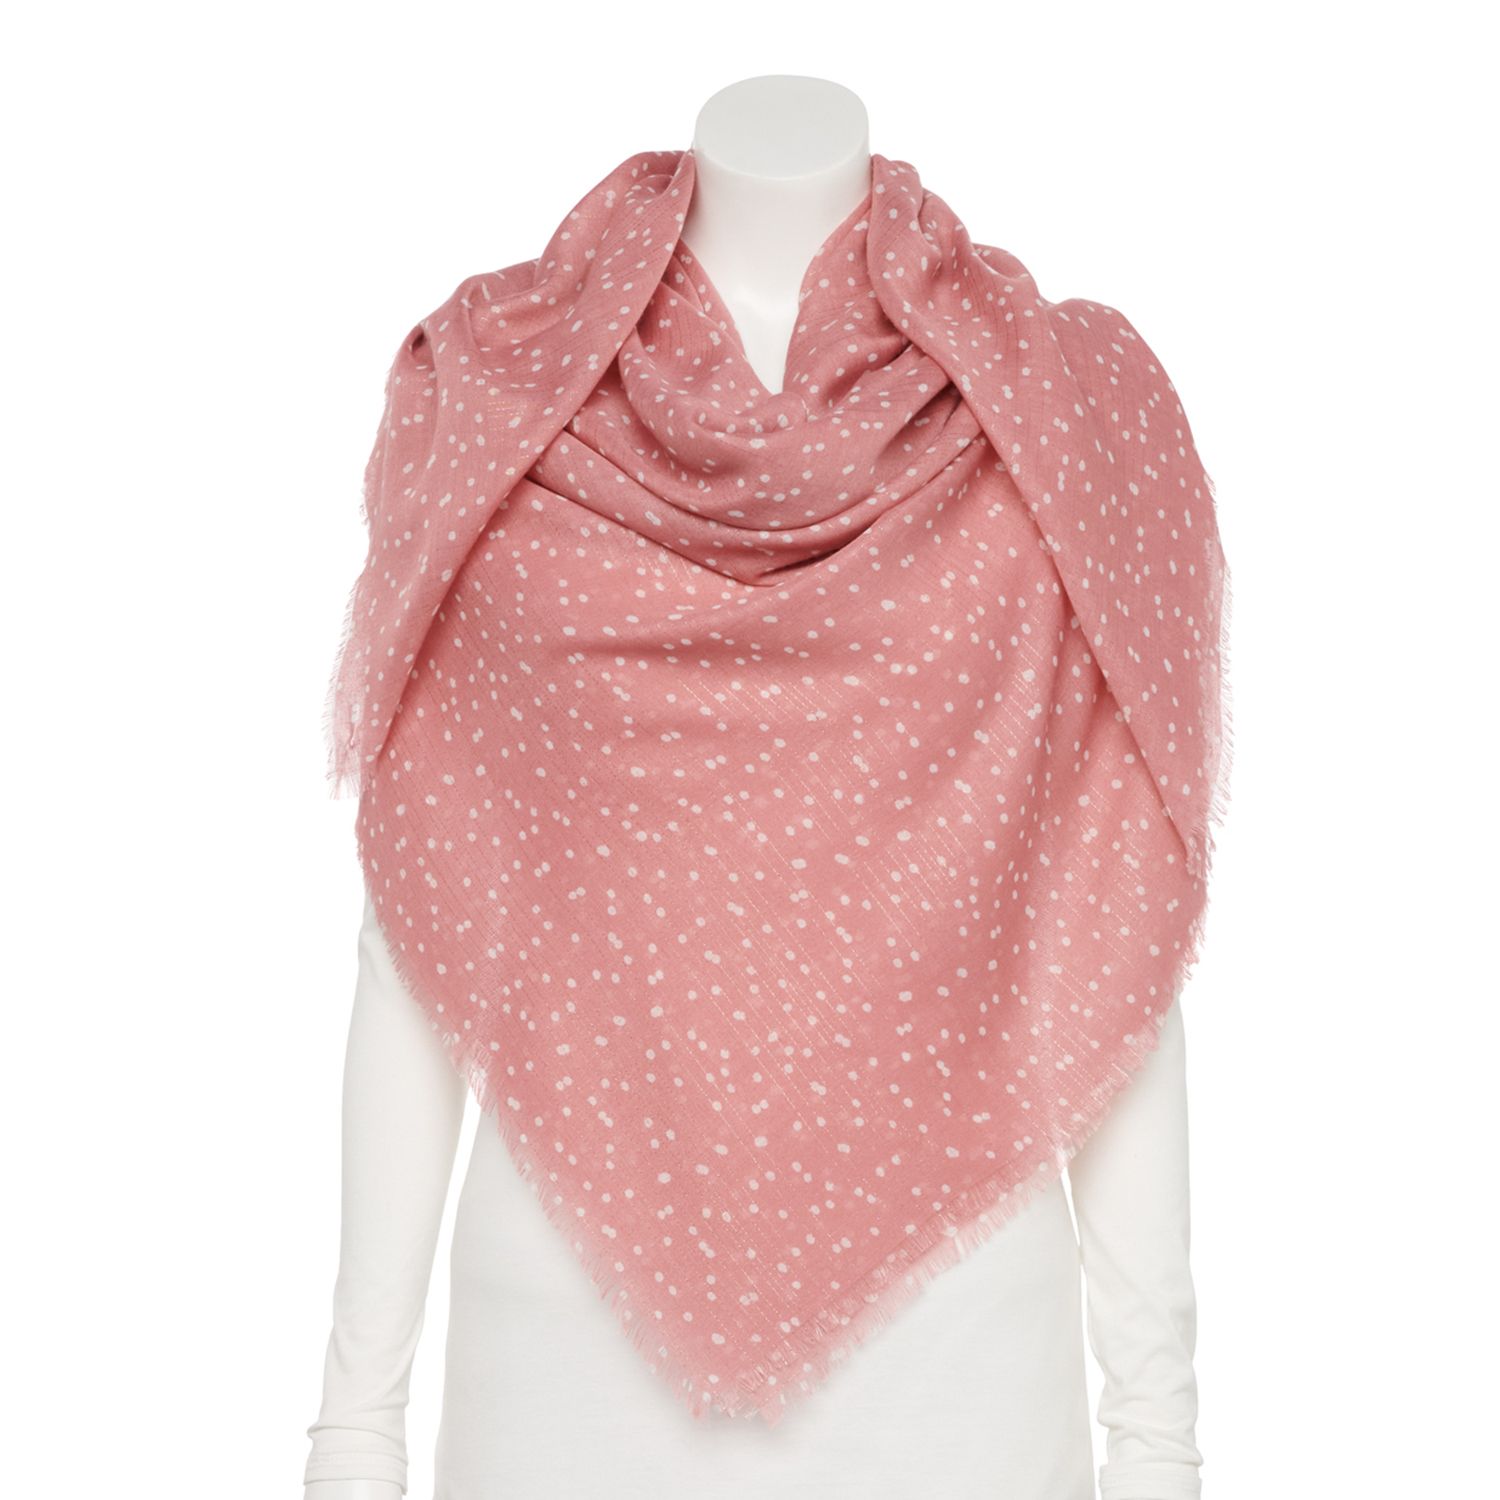 Image for LC Lauren Conrad Women's Dotty Print Scarf at Kohl's.